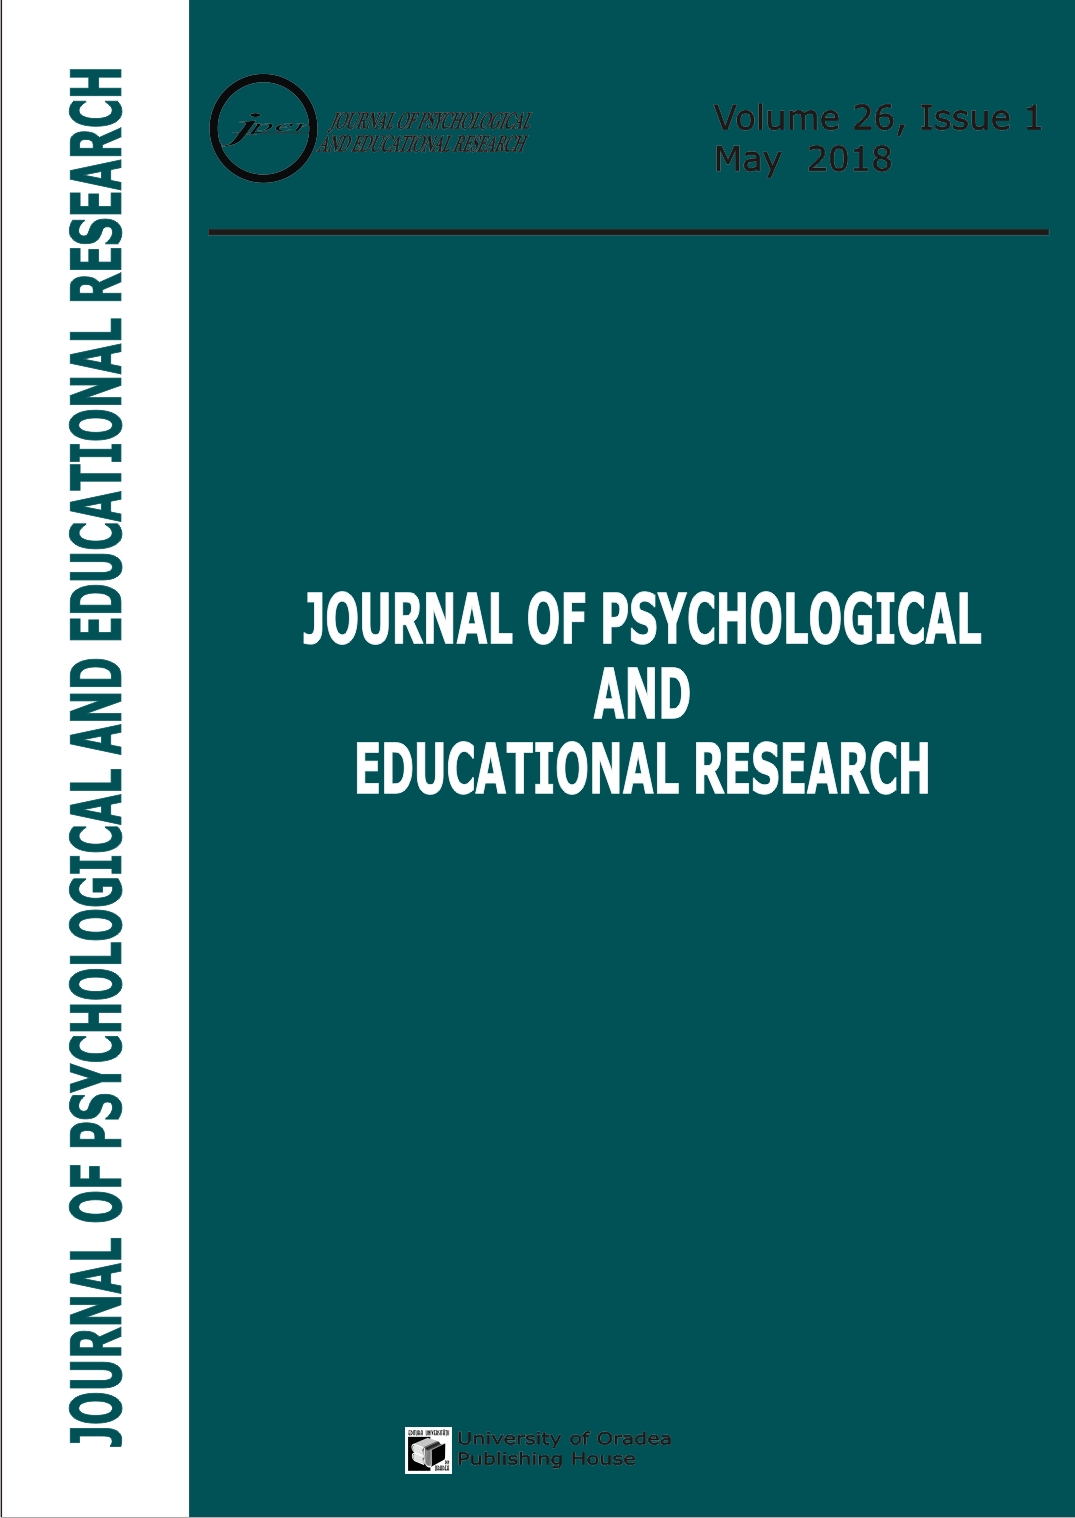 Recovery behaviours in education: the role of innovativeness and emotional intelligence Cover Image